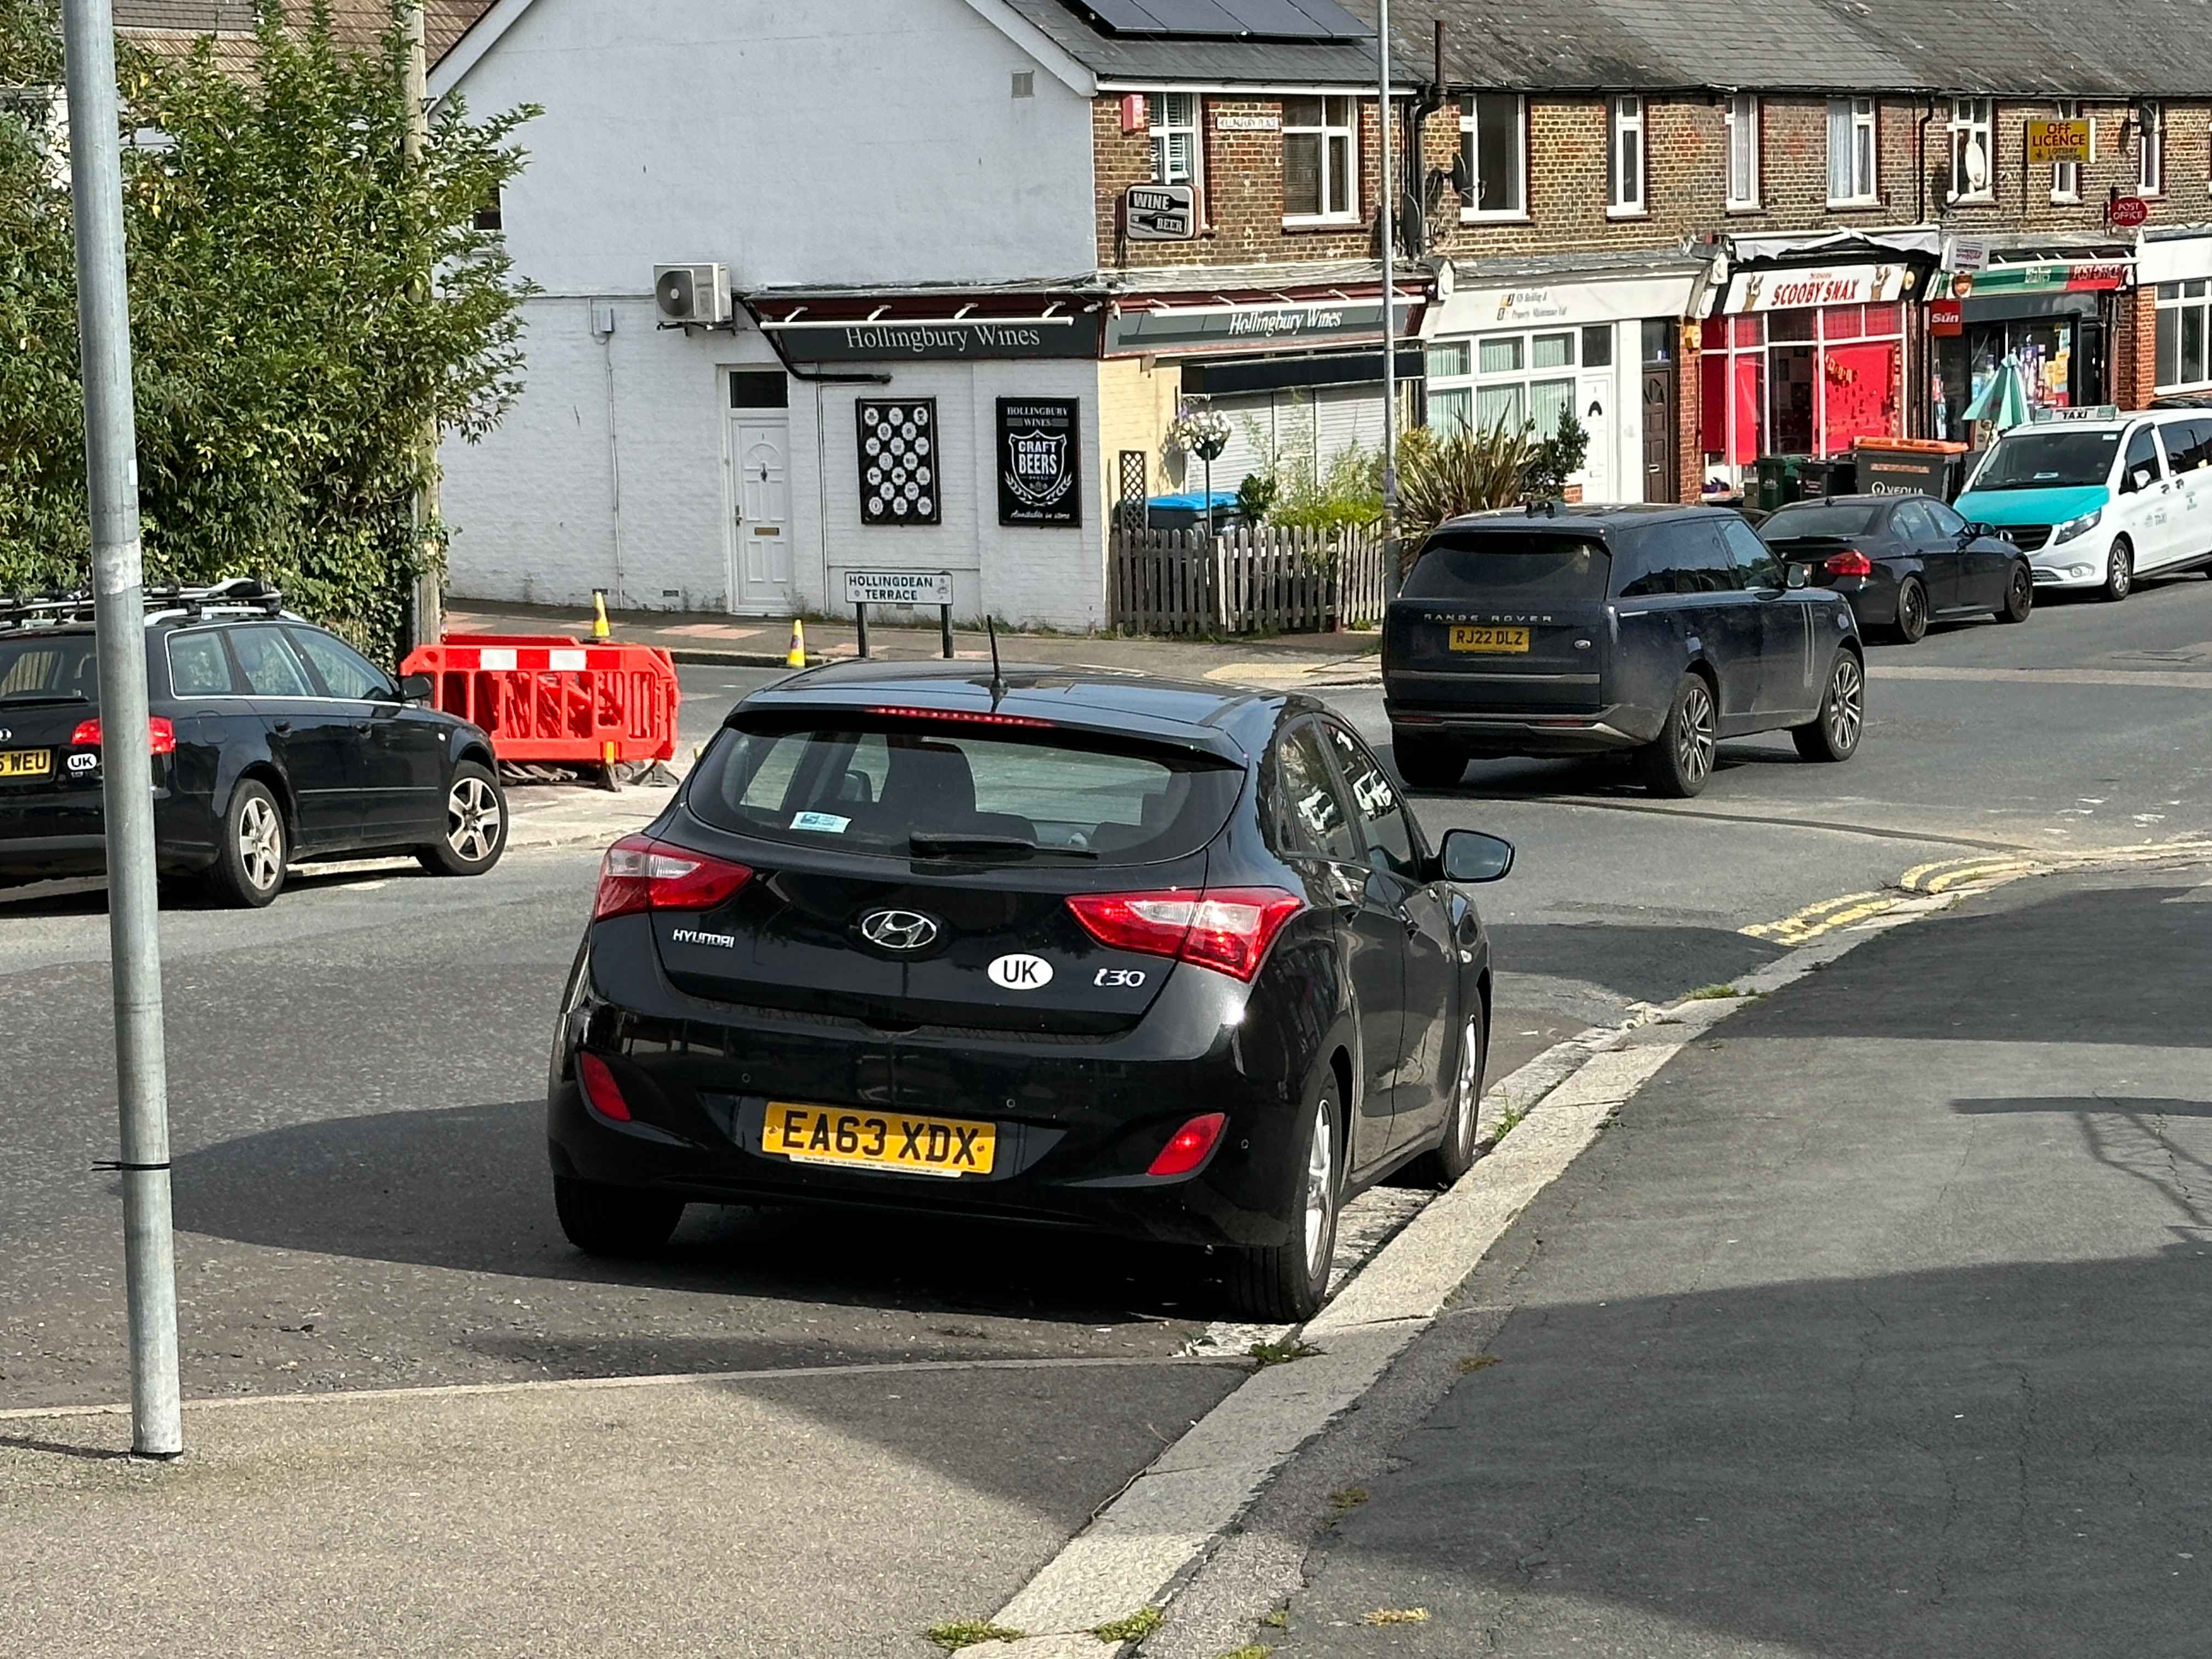 Photograph of EA63 XDX - a Black Hyundai i30 parked in Hollingdean by a non-resident. The second of two photographs supplied by the residents of Hollingdean.